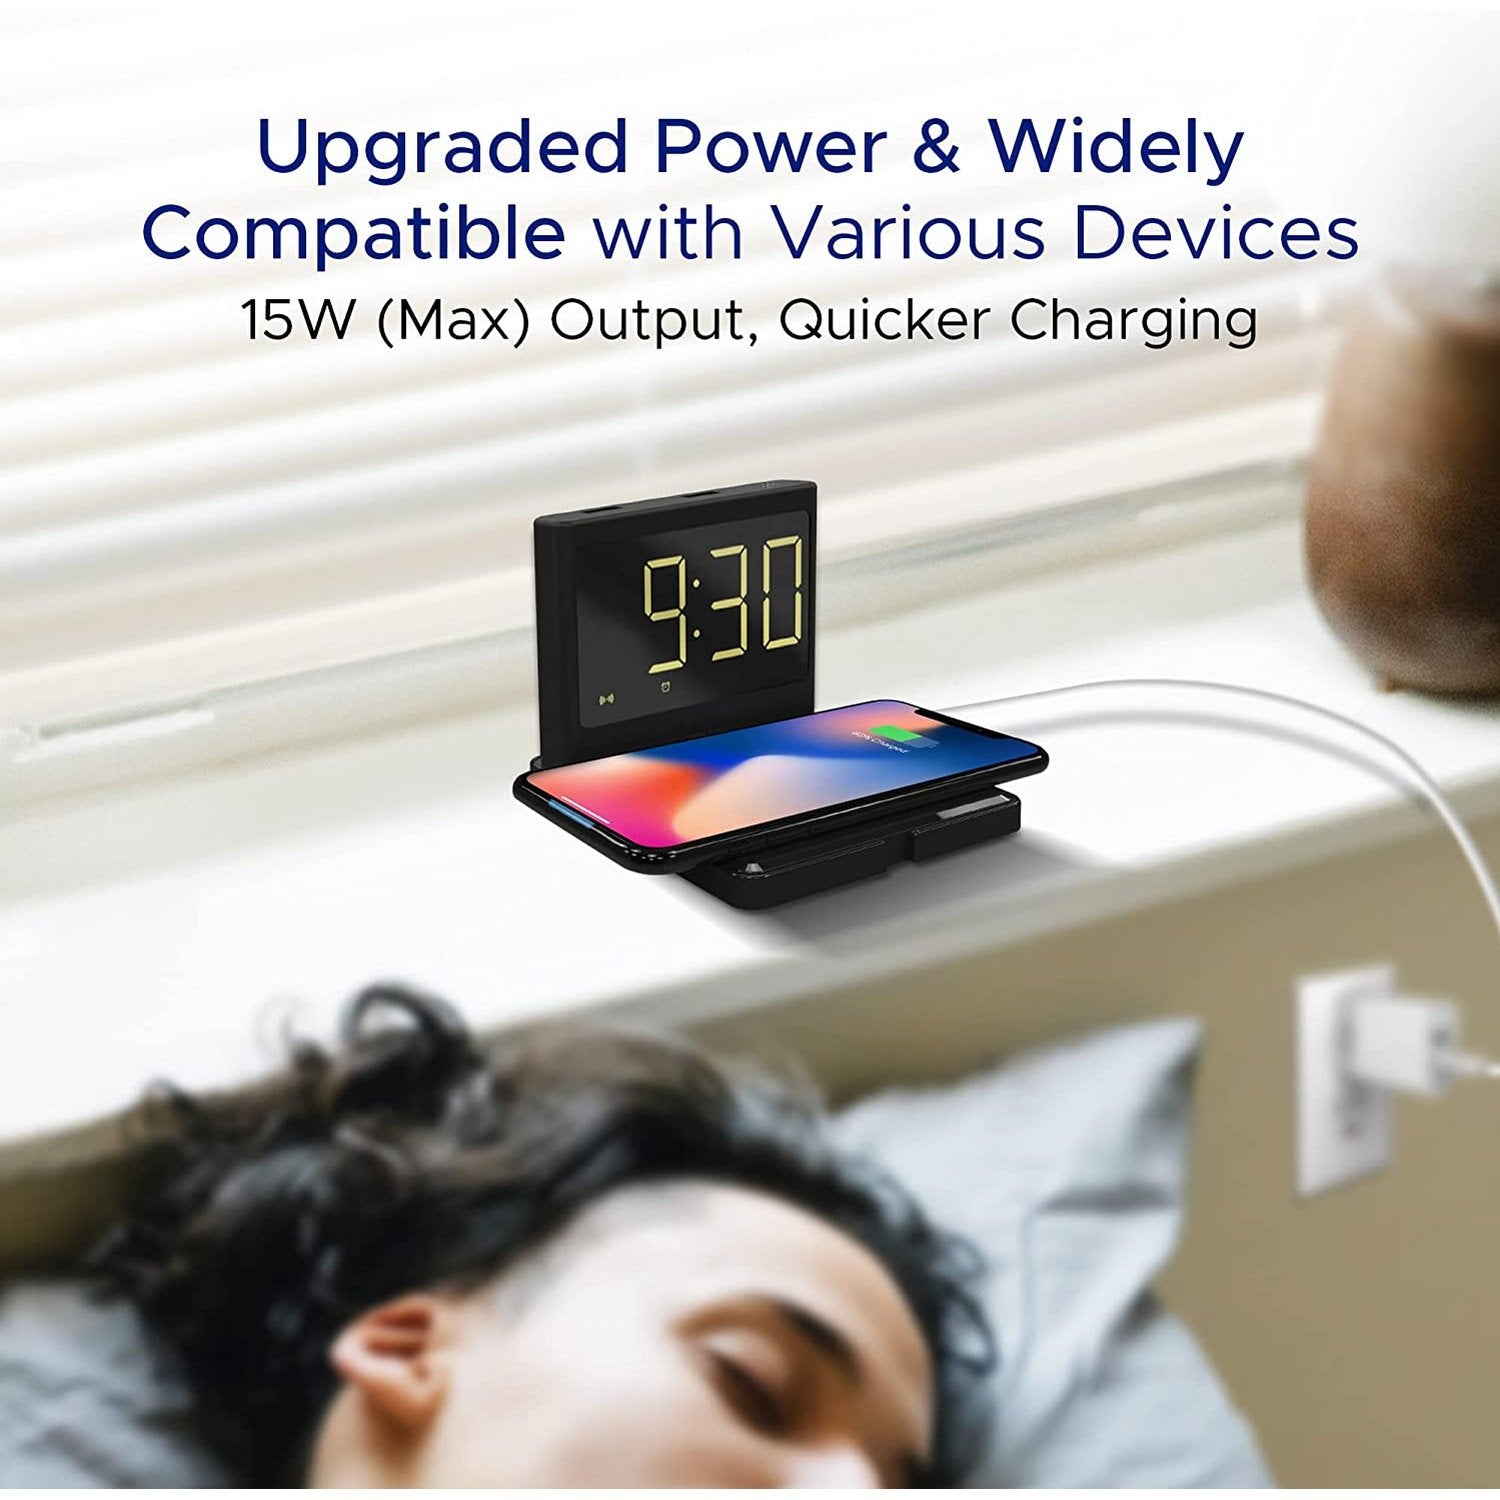 Alarm Clock with Wireless Charging Pad for Smartphones